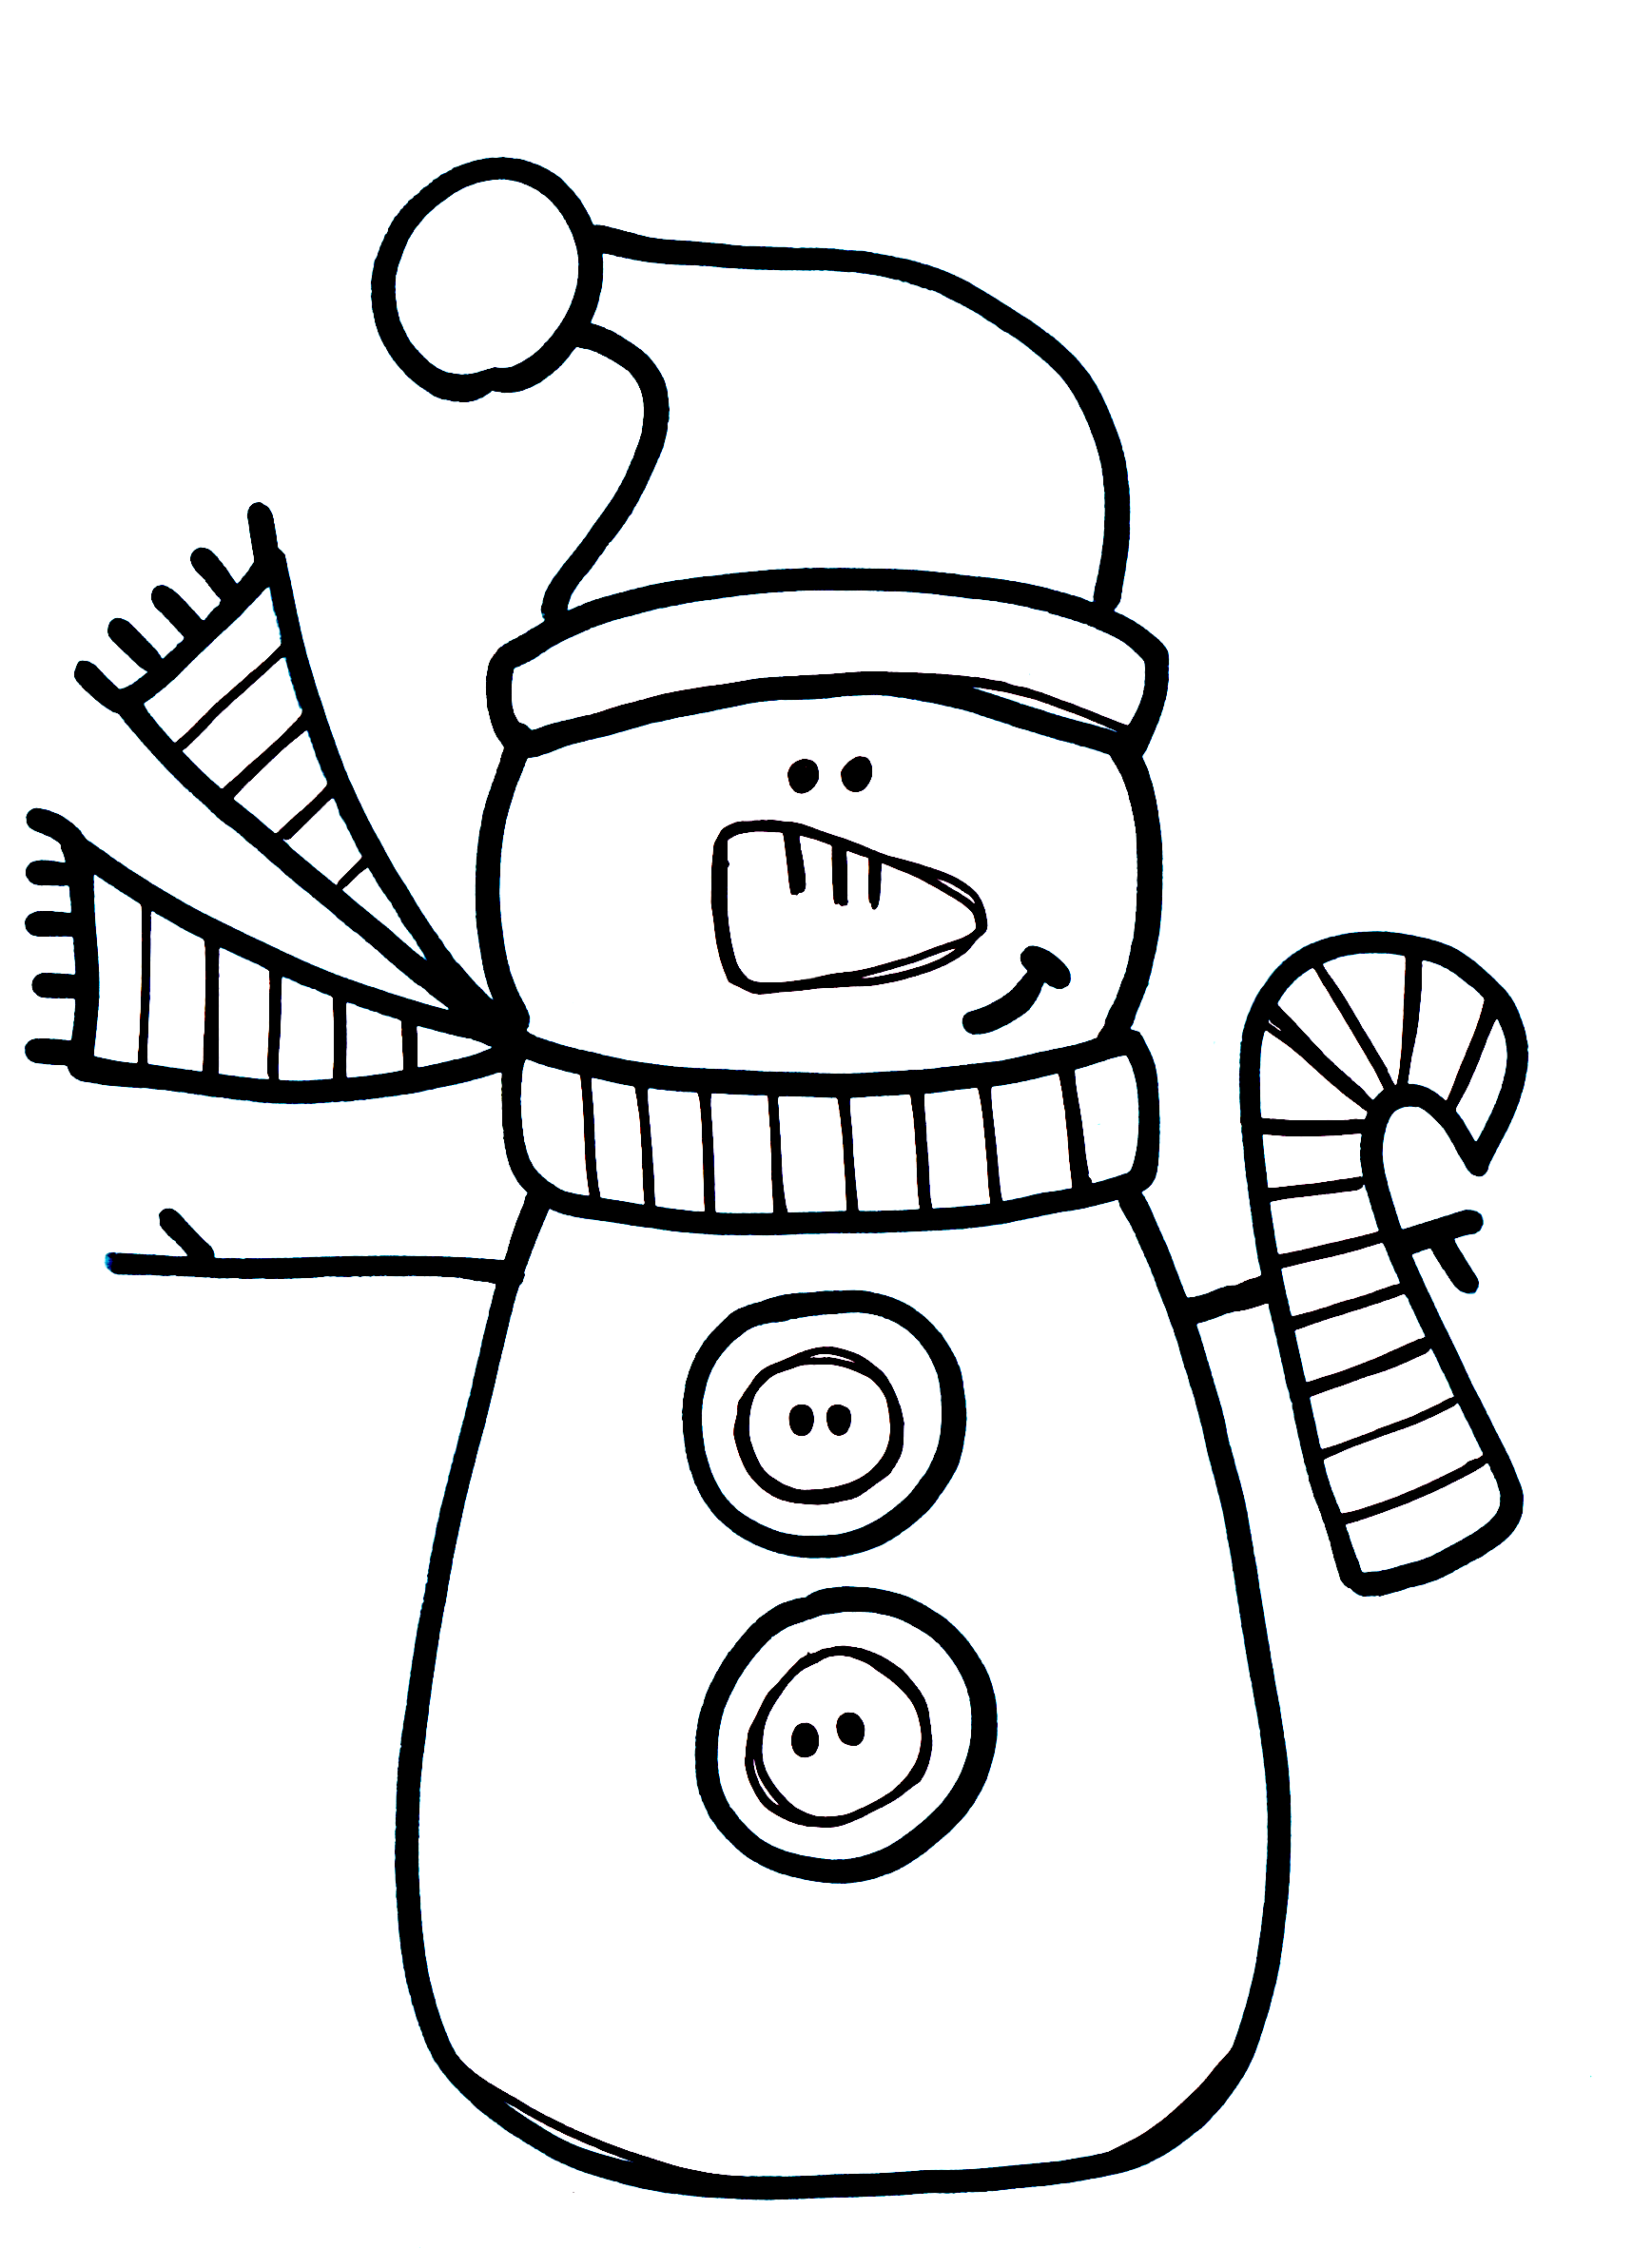 Pin by mtra anita ð on dibujos clips snowman coloring pages christmas applique christmas candle crafts